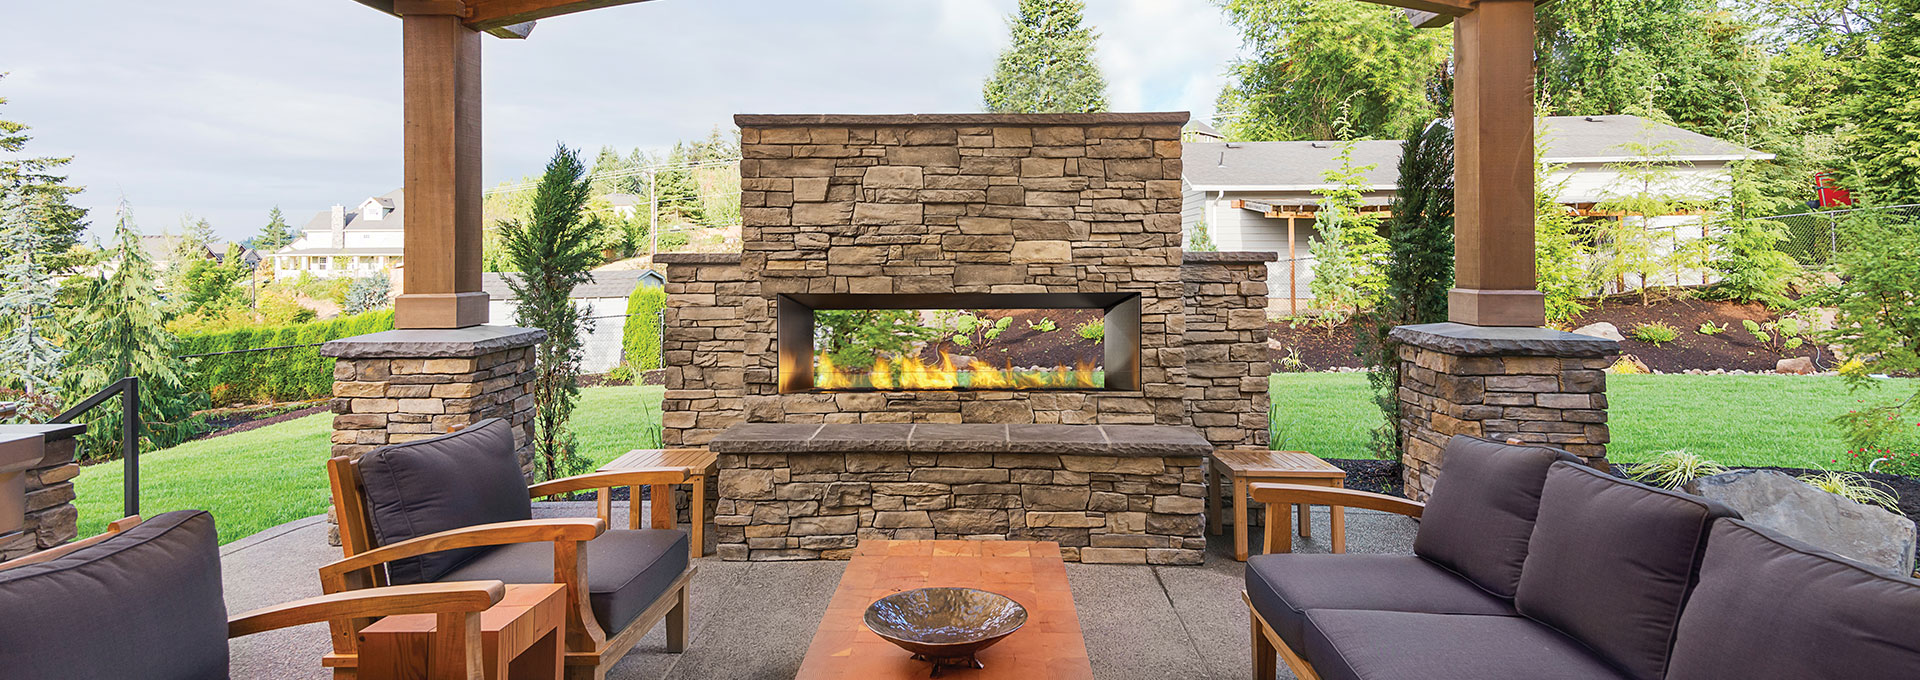 Outdoor Gas Fireplaces Fireplace Kits, Cultured Stone Propane Natural Gas Outdoor Fireplace